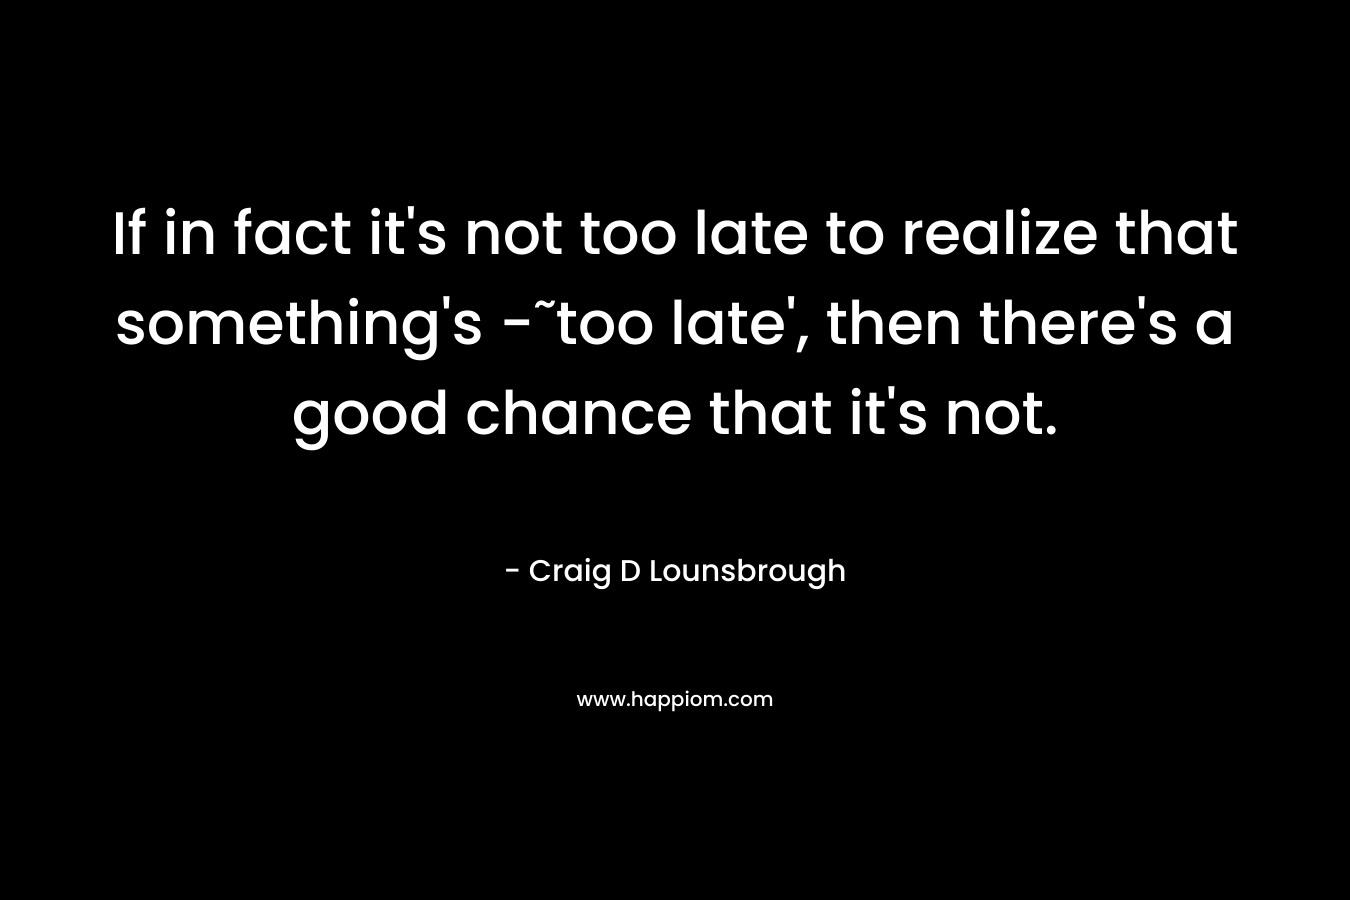 If in fact it's not too late to realize that something's -˜too late', then there's a good chance that it's not.